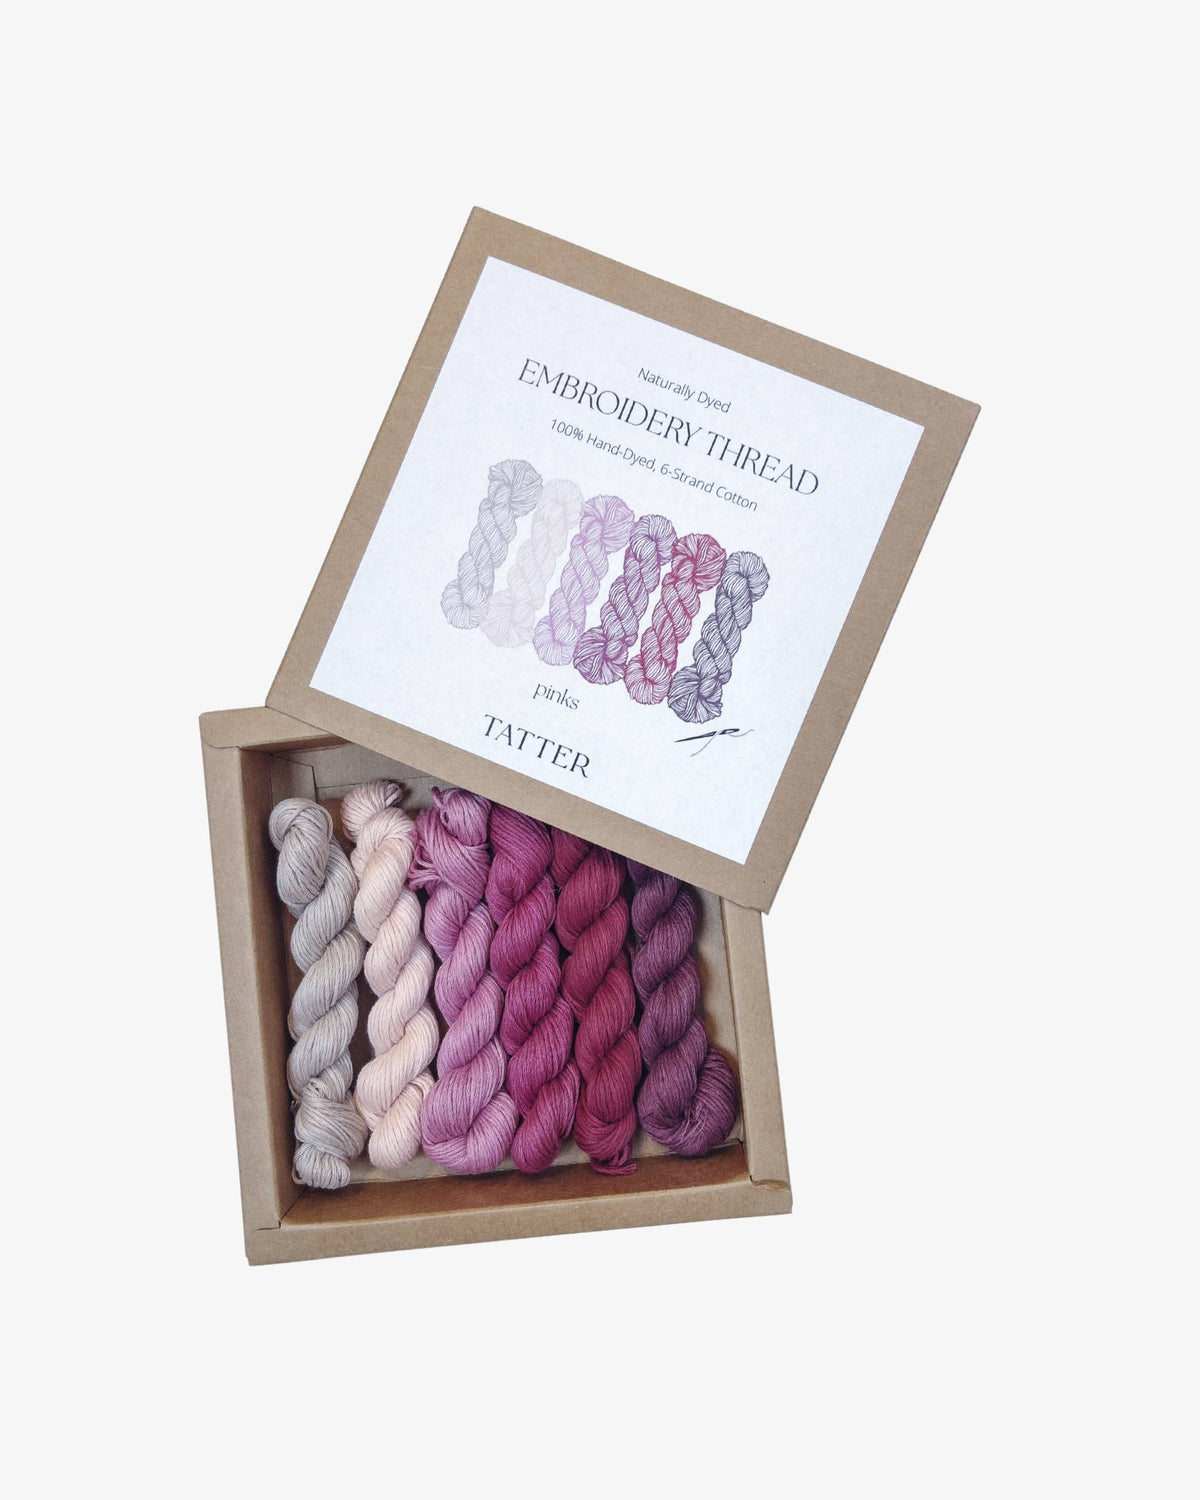 Six-Strand Cotton Thread Sets by Tatter